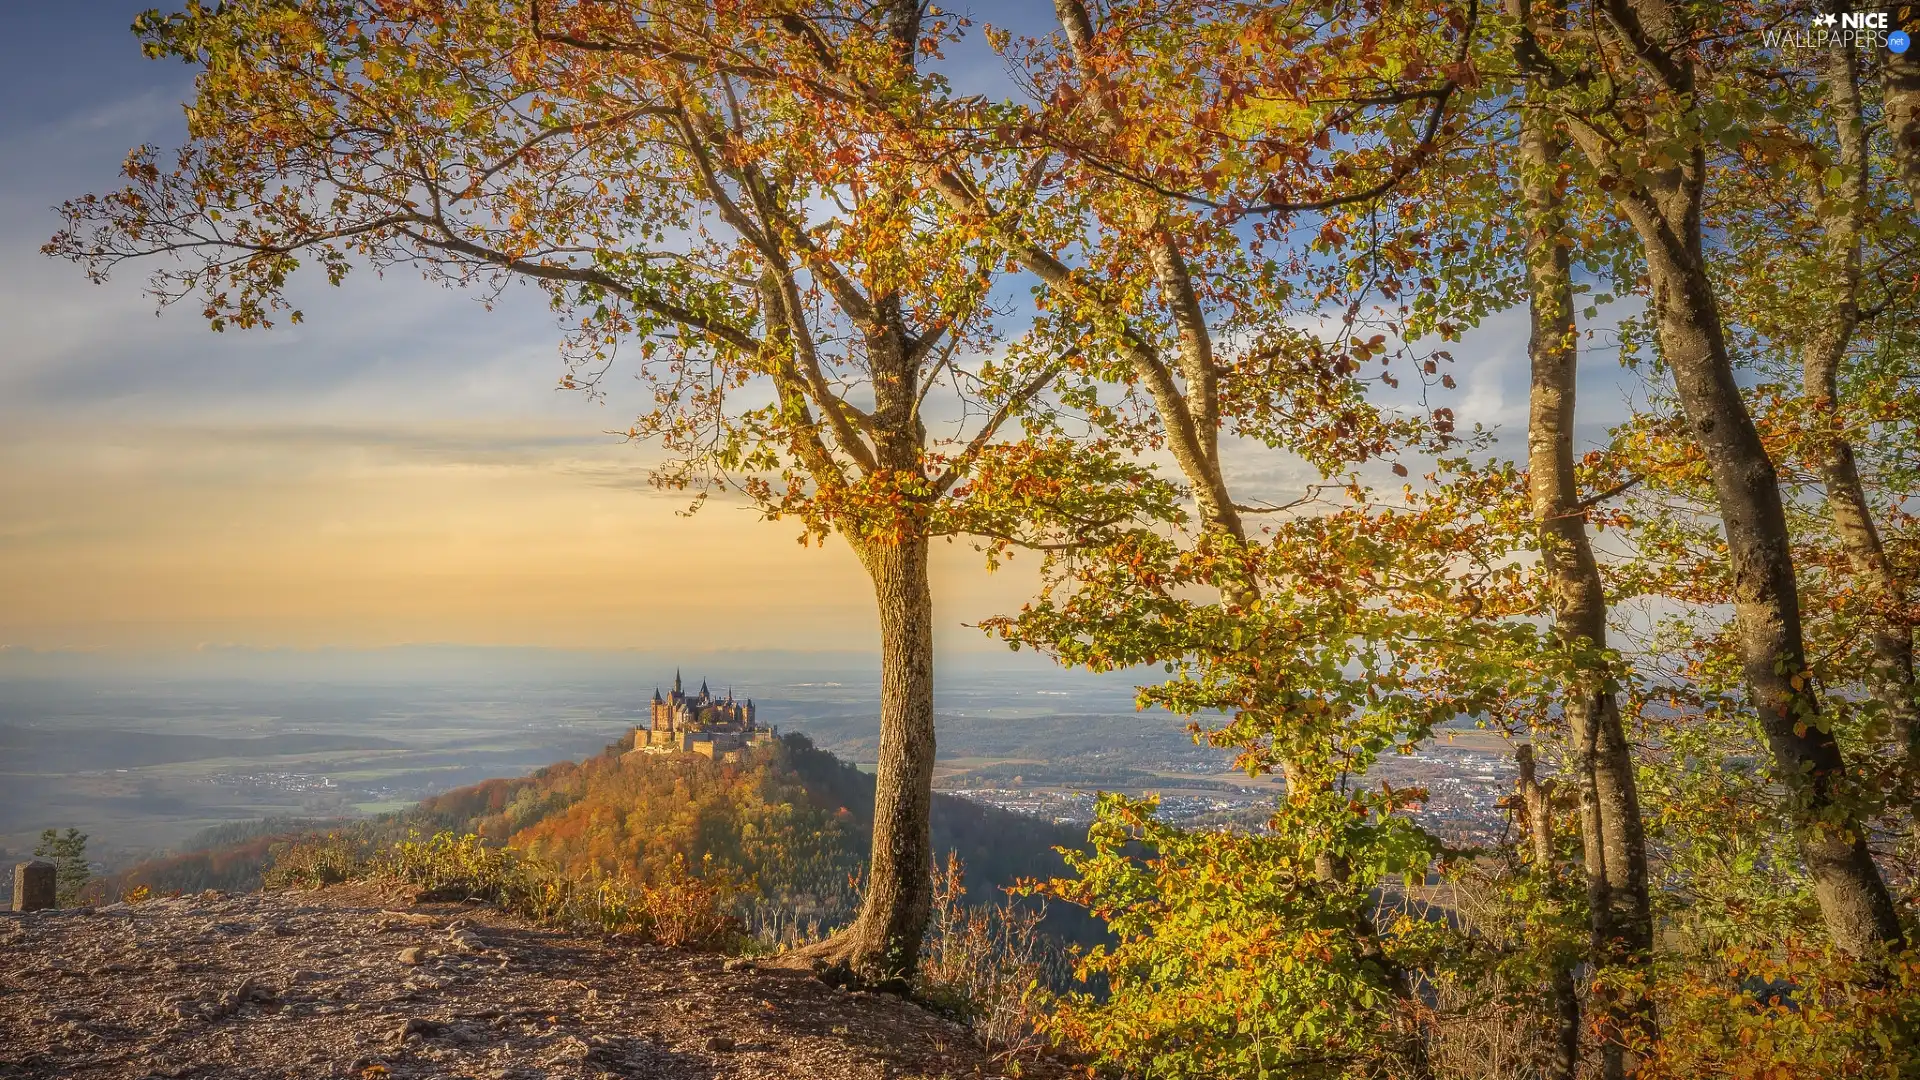 viewes, Hohenzollern Castle, Baden-Württemberg, trees, Hohenzollern Mountain, autumn, Germany